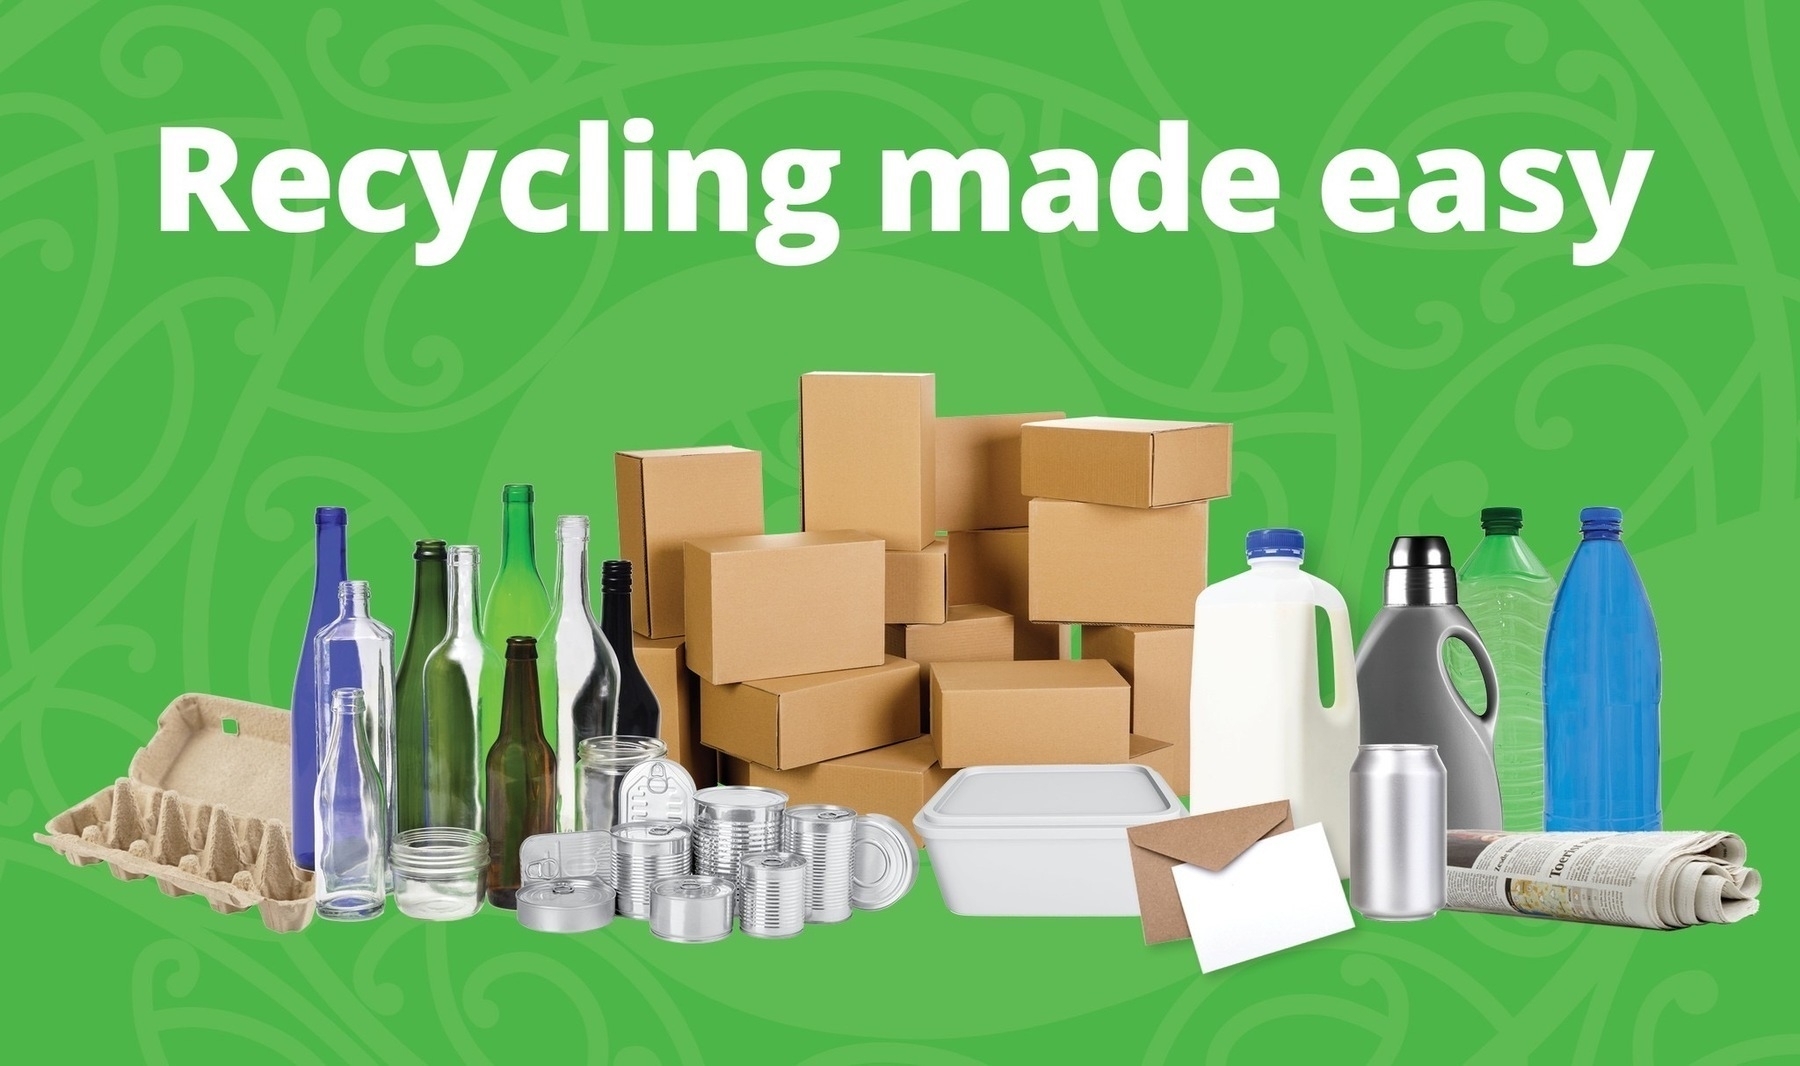 Recycling made easy. 